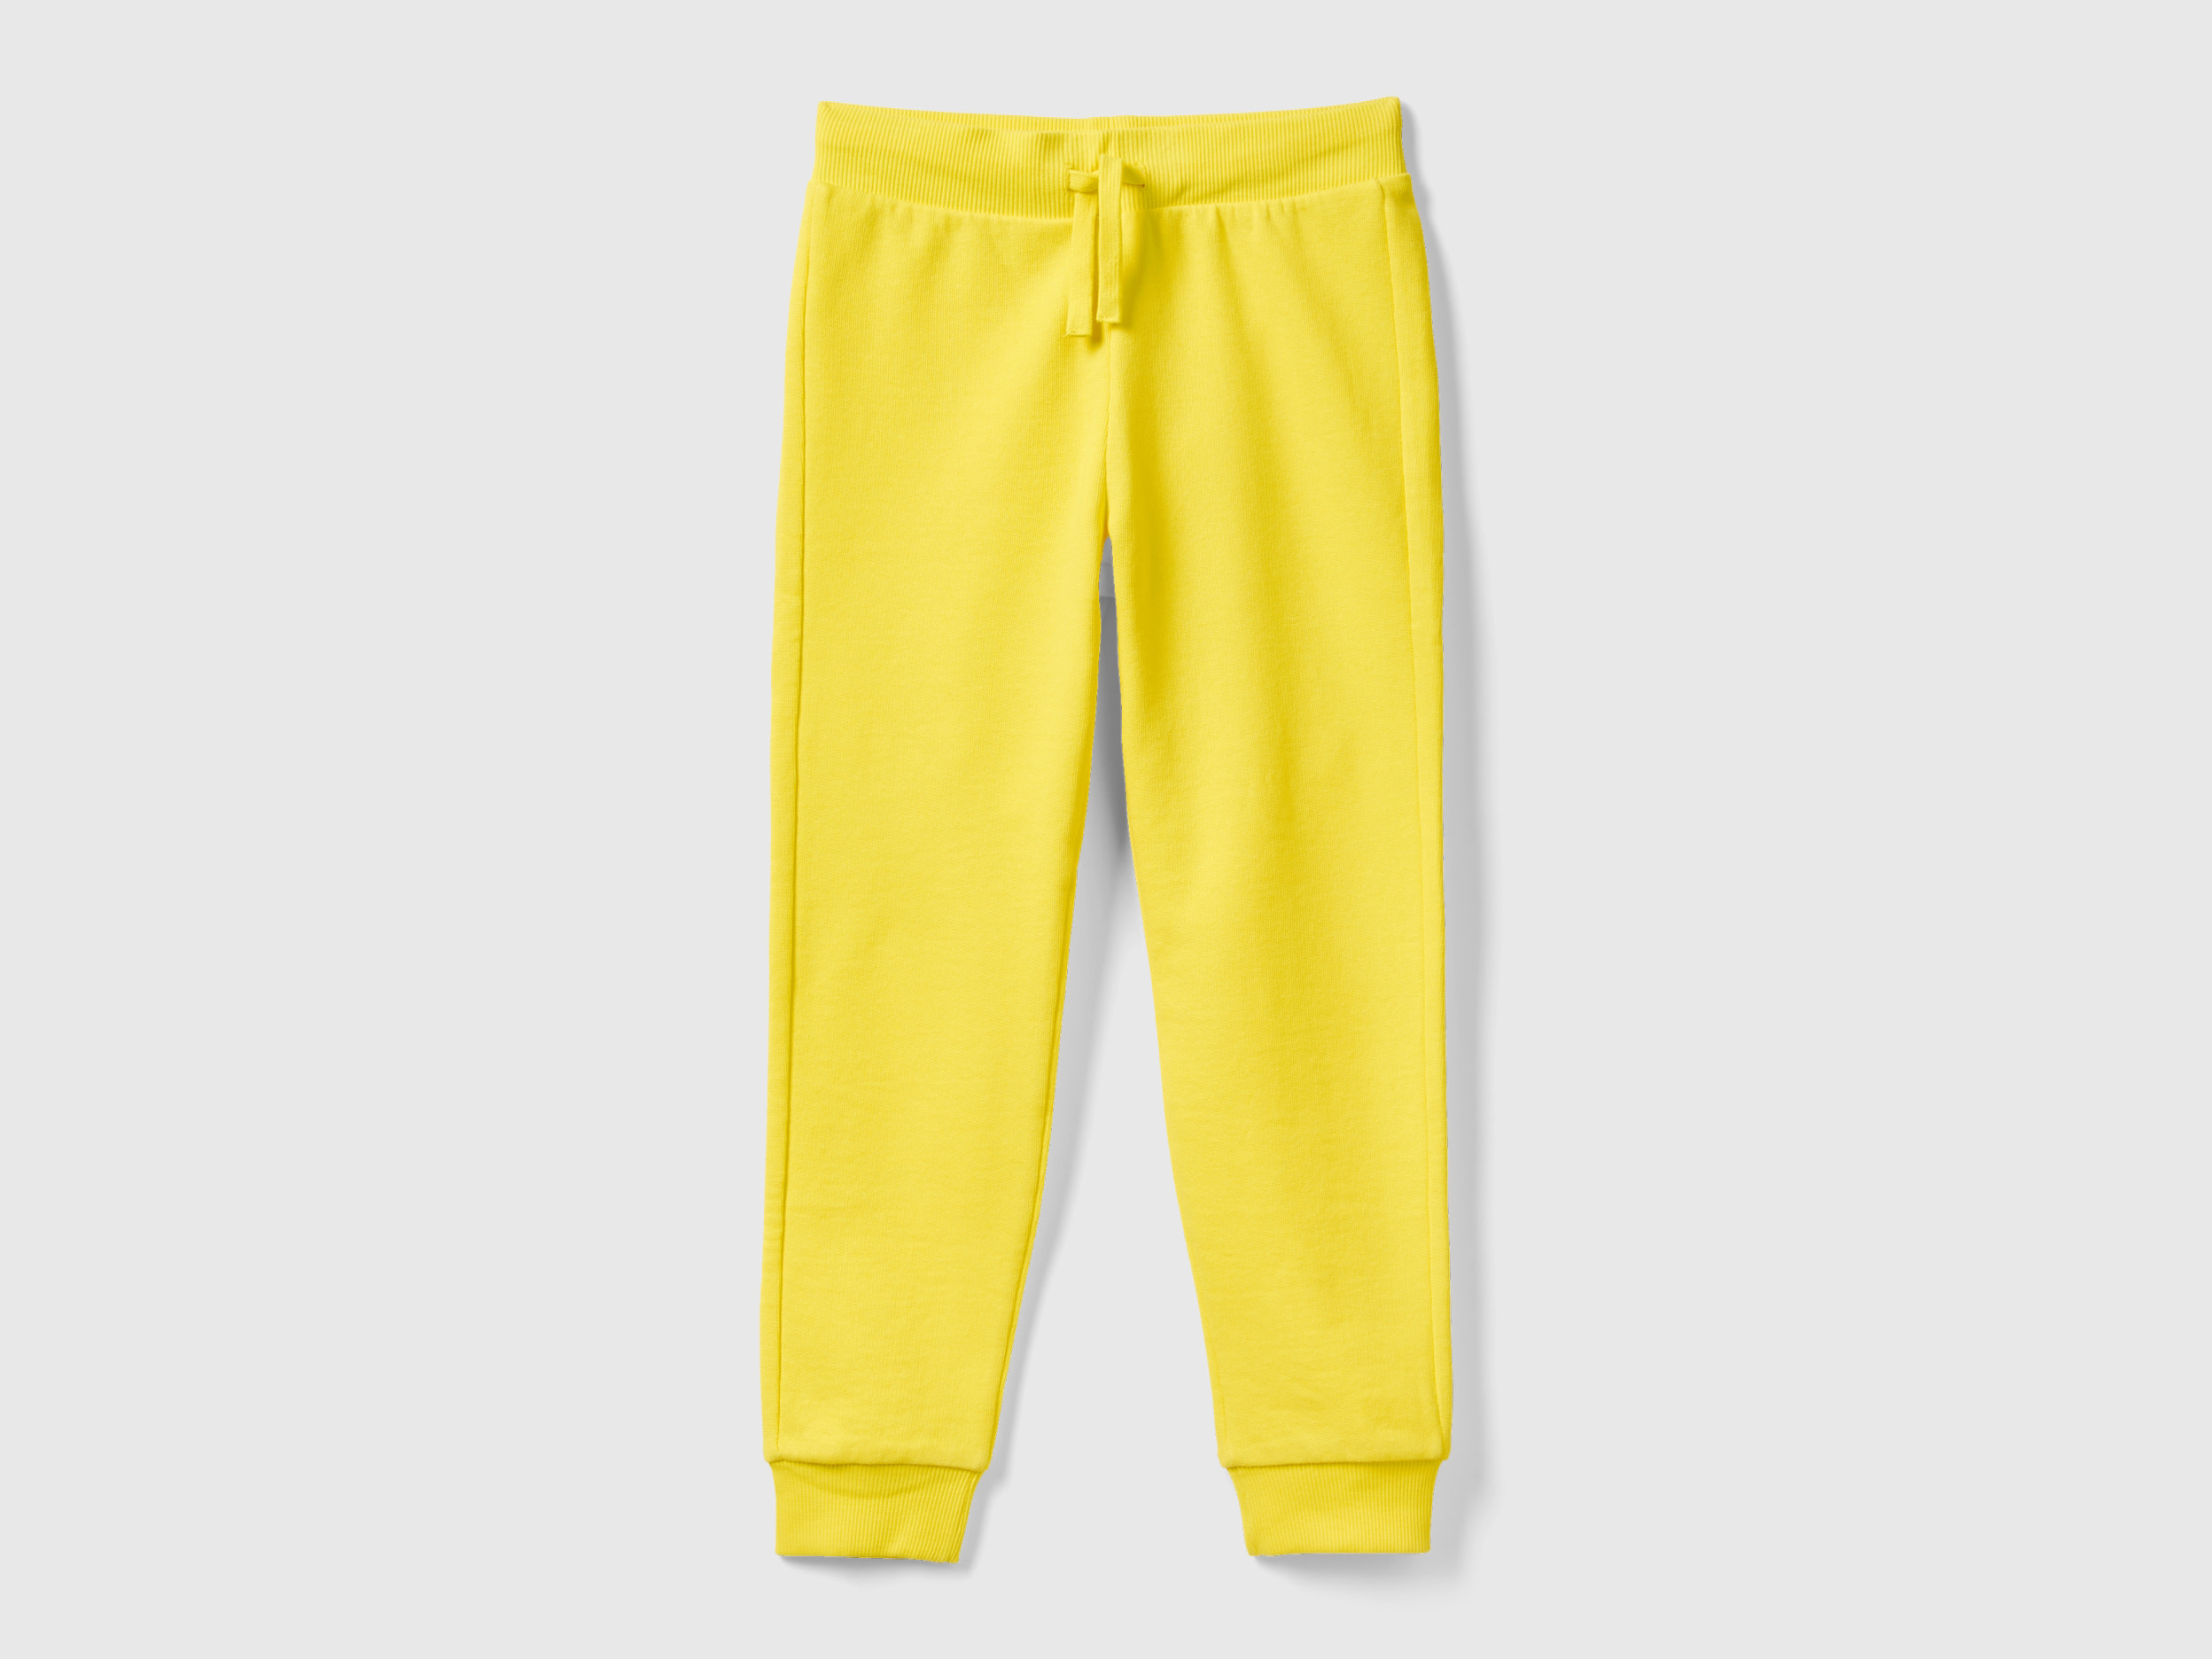 Benetton, Sporty Trousers With Drawstring, size 3XL, Yellow, Kids